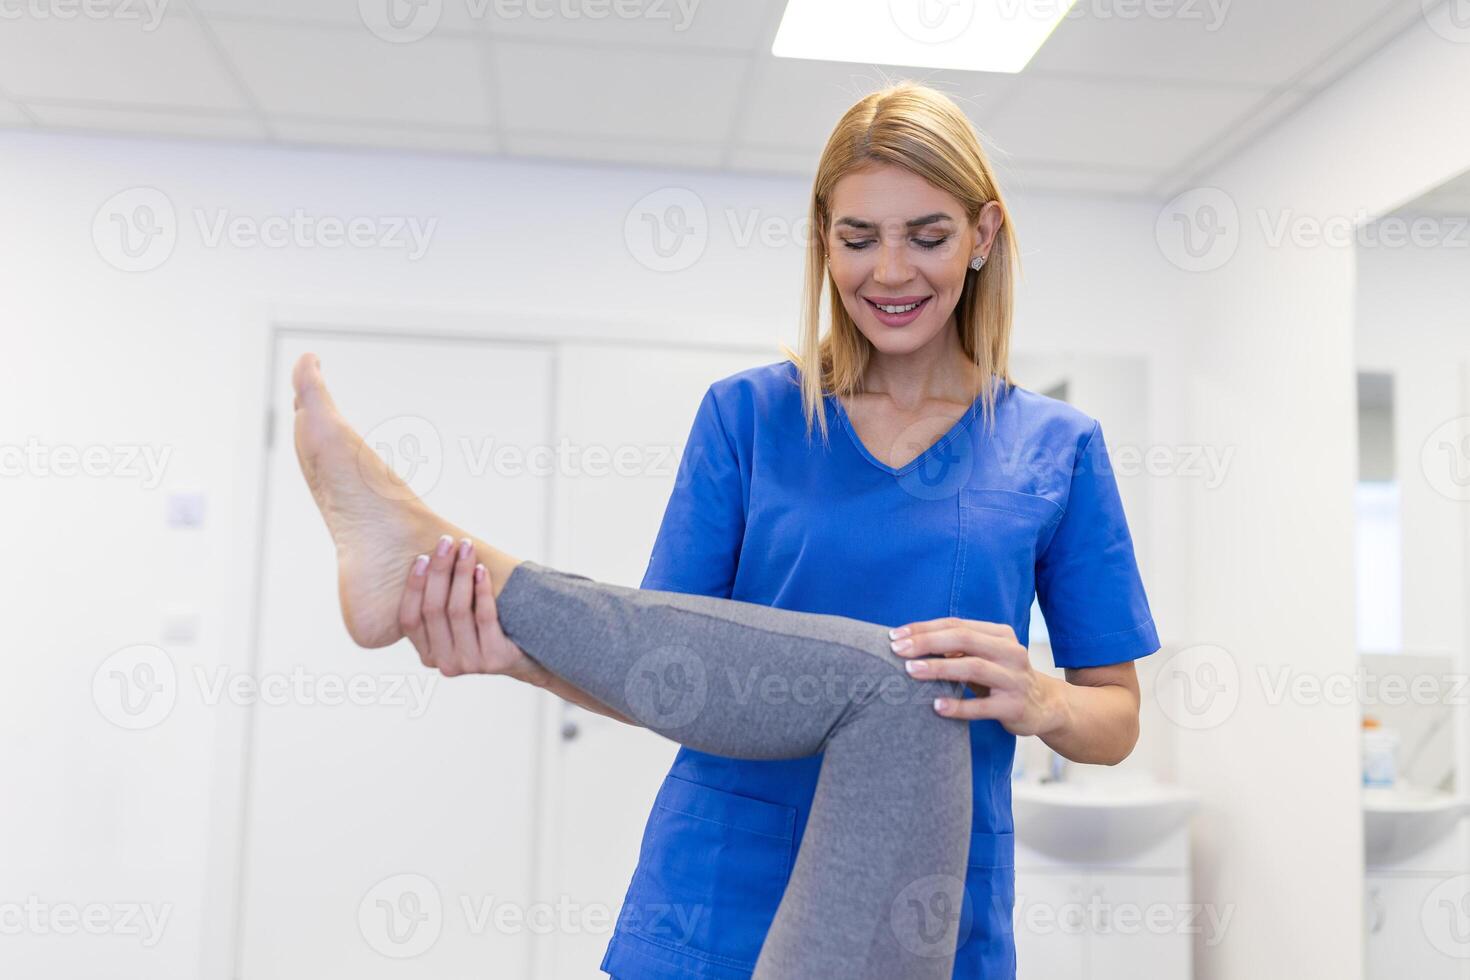 Physiotherapist working with patient in clinic, closeup. A Modern rehabilitation physiotherapy worker with senior client, Physical therapist stretching patient knee photo